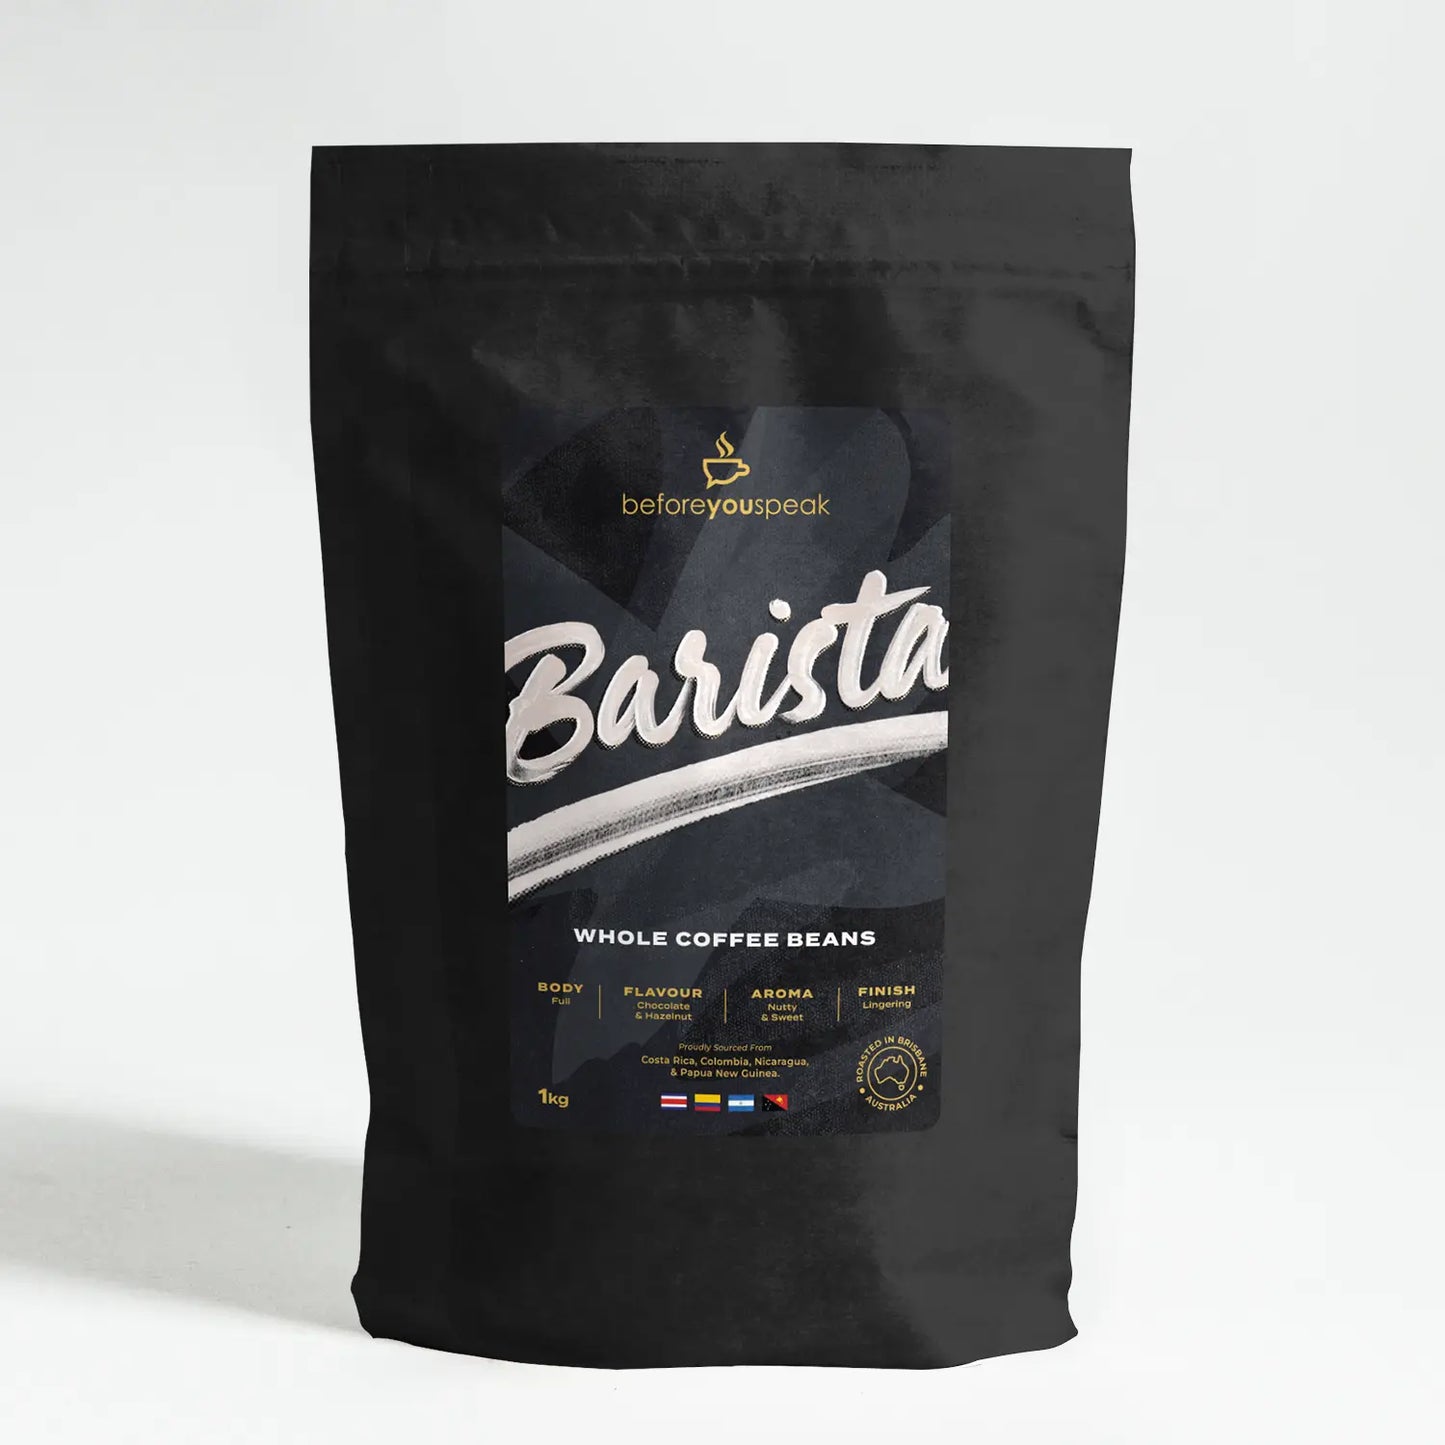 Barista Whole Coffee Beans